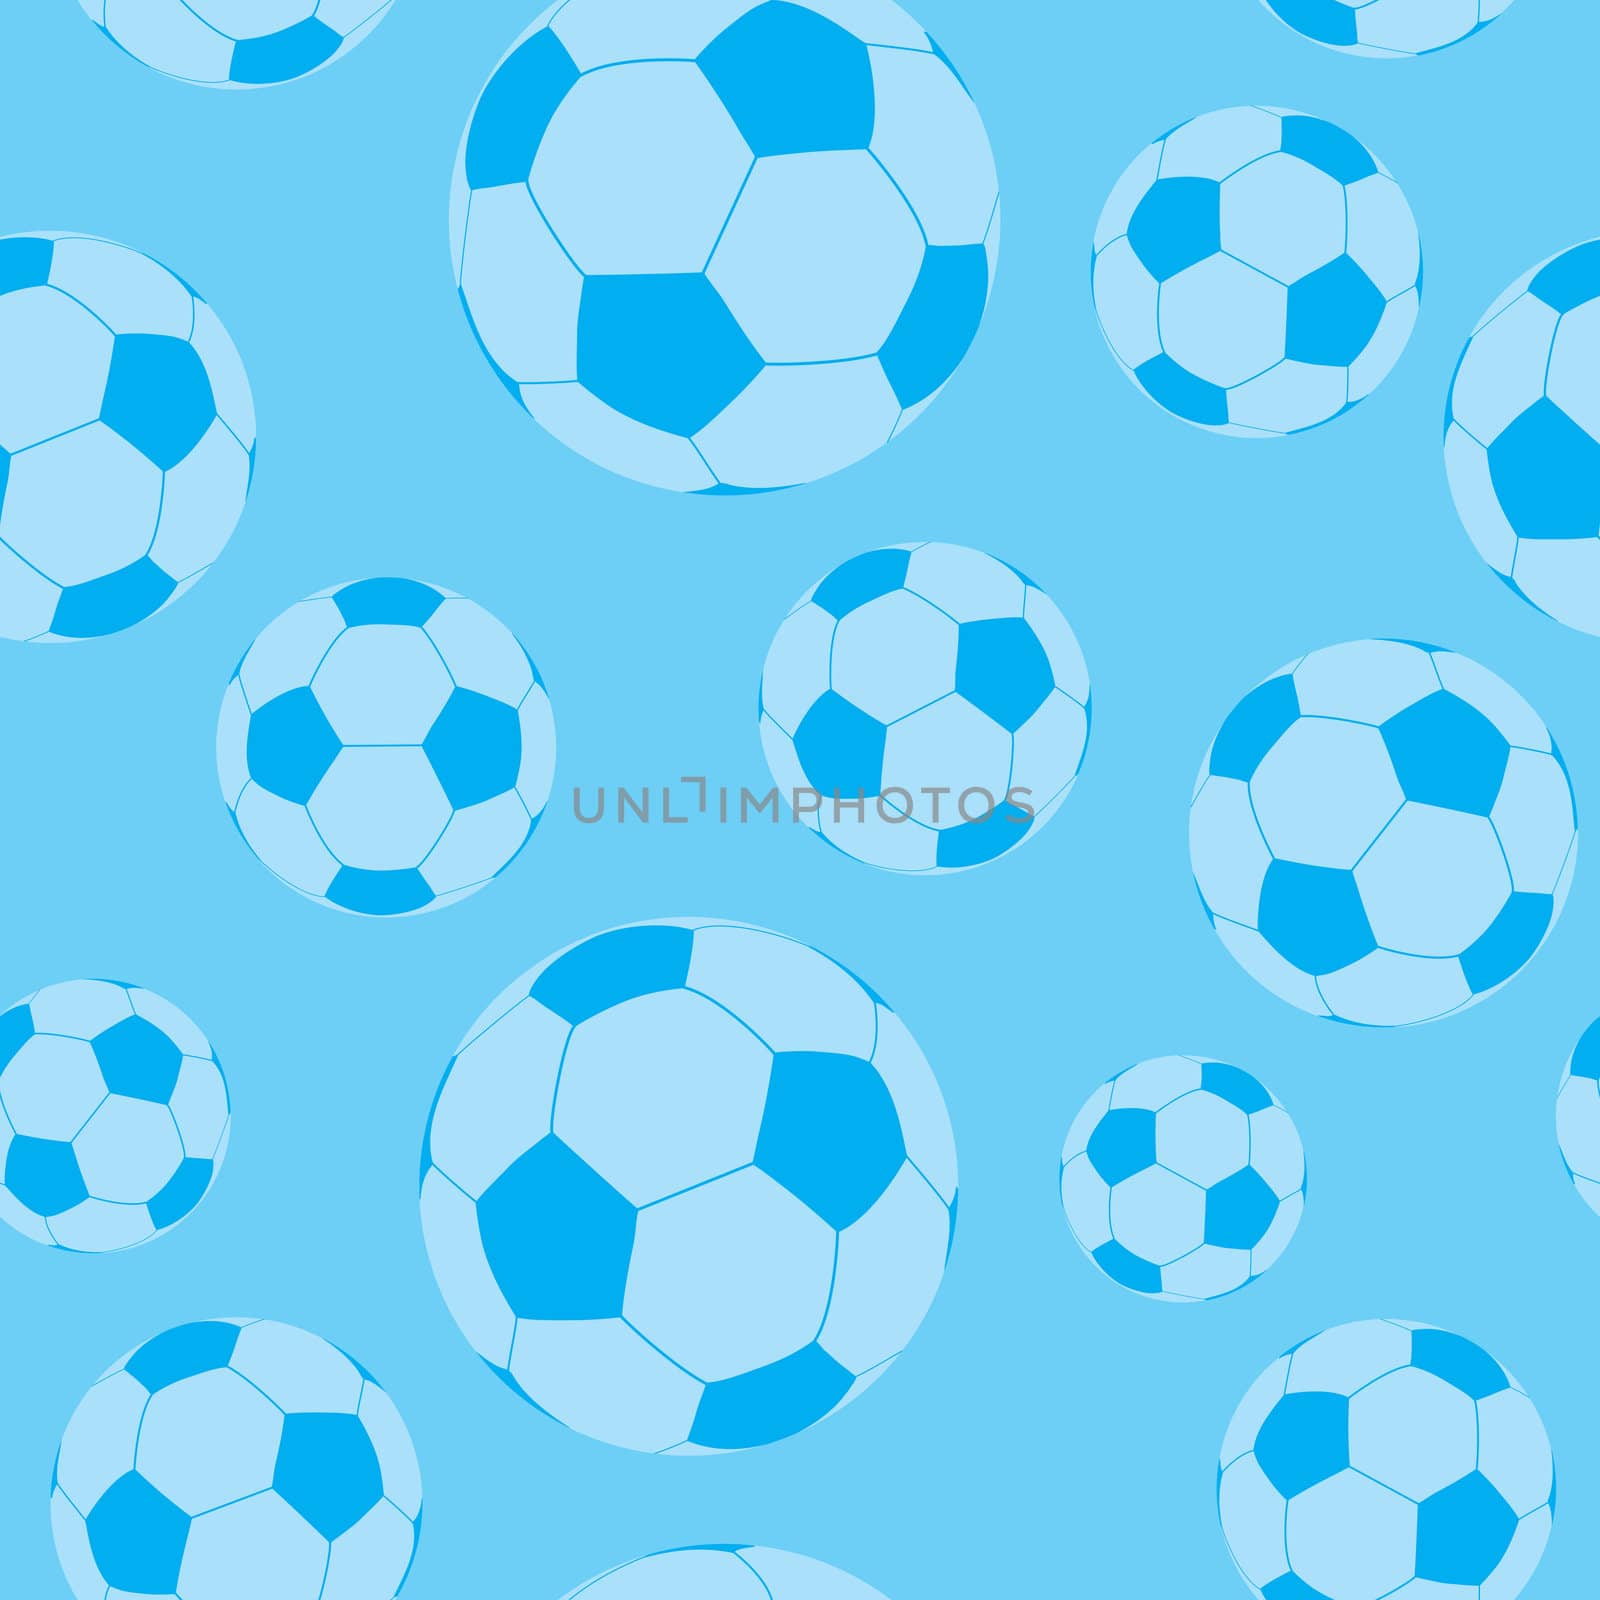 seamless football or soccer wallpaper background pattern in blue